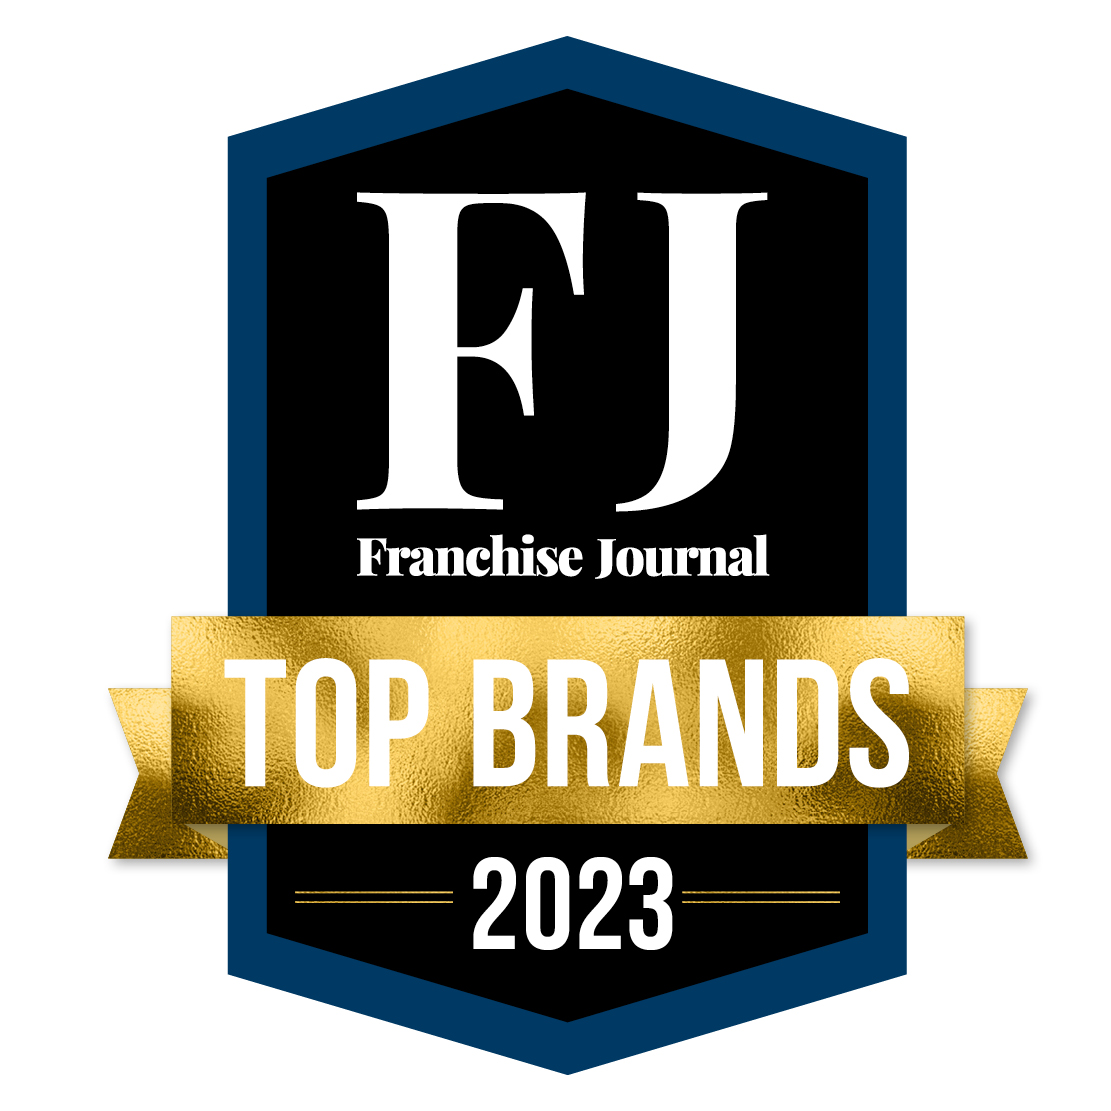 Grand Welcome Secures Coveted Distinction as a Top Brand of 2023 According to Franchise Journal